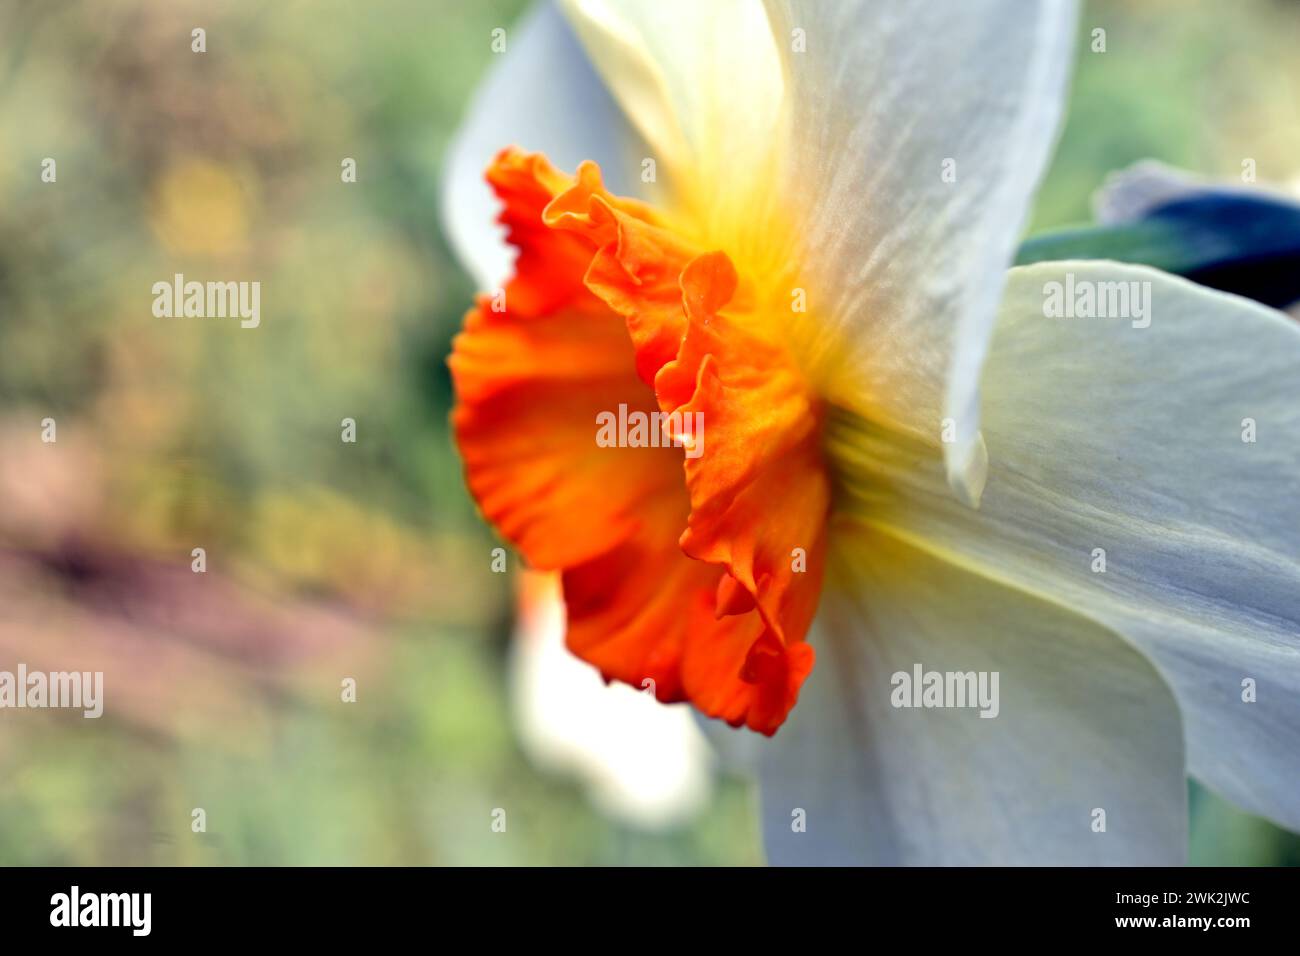 The orange funnel-shaped center with a corolla is surrounded by white petals of the narcissus flower. Stock Photo